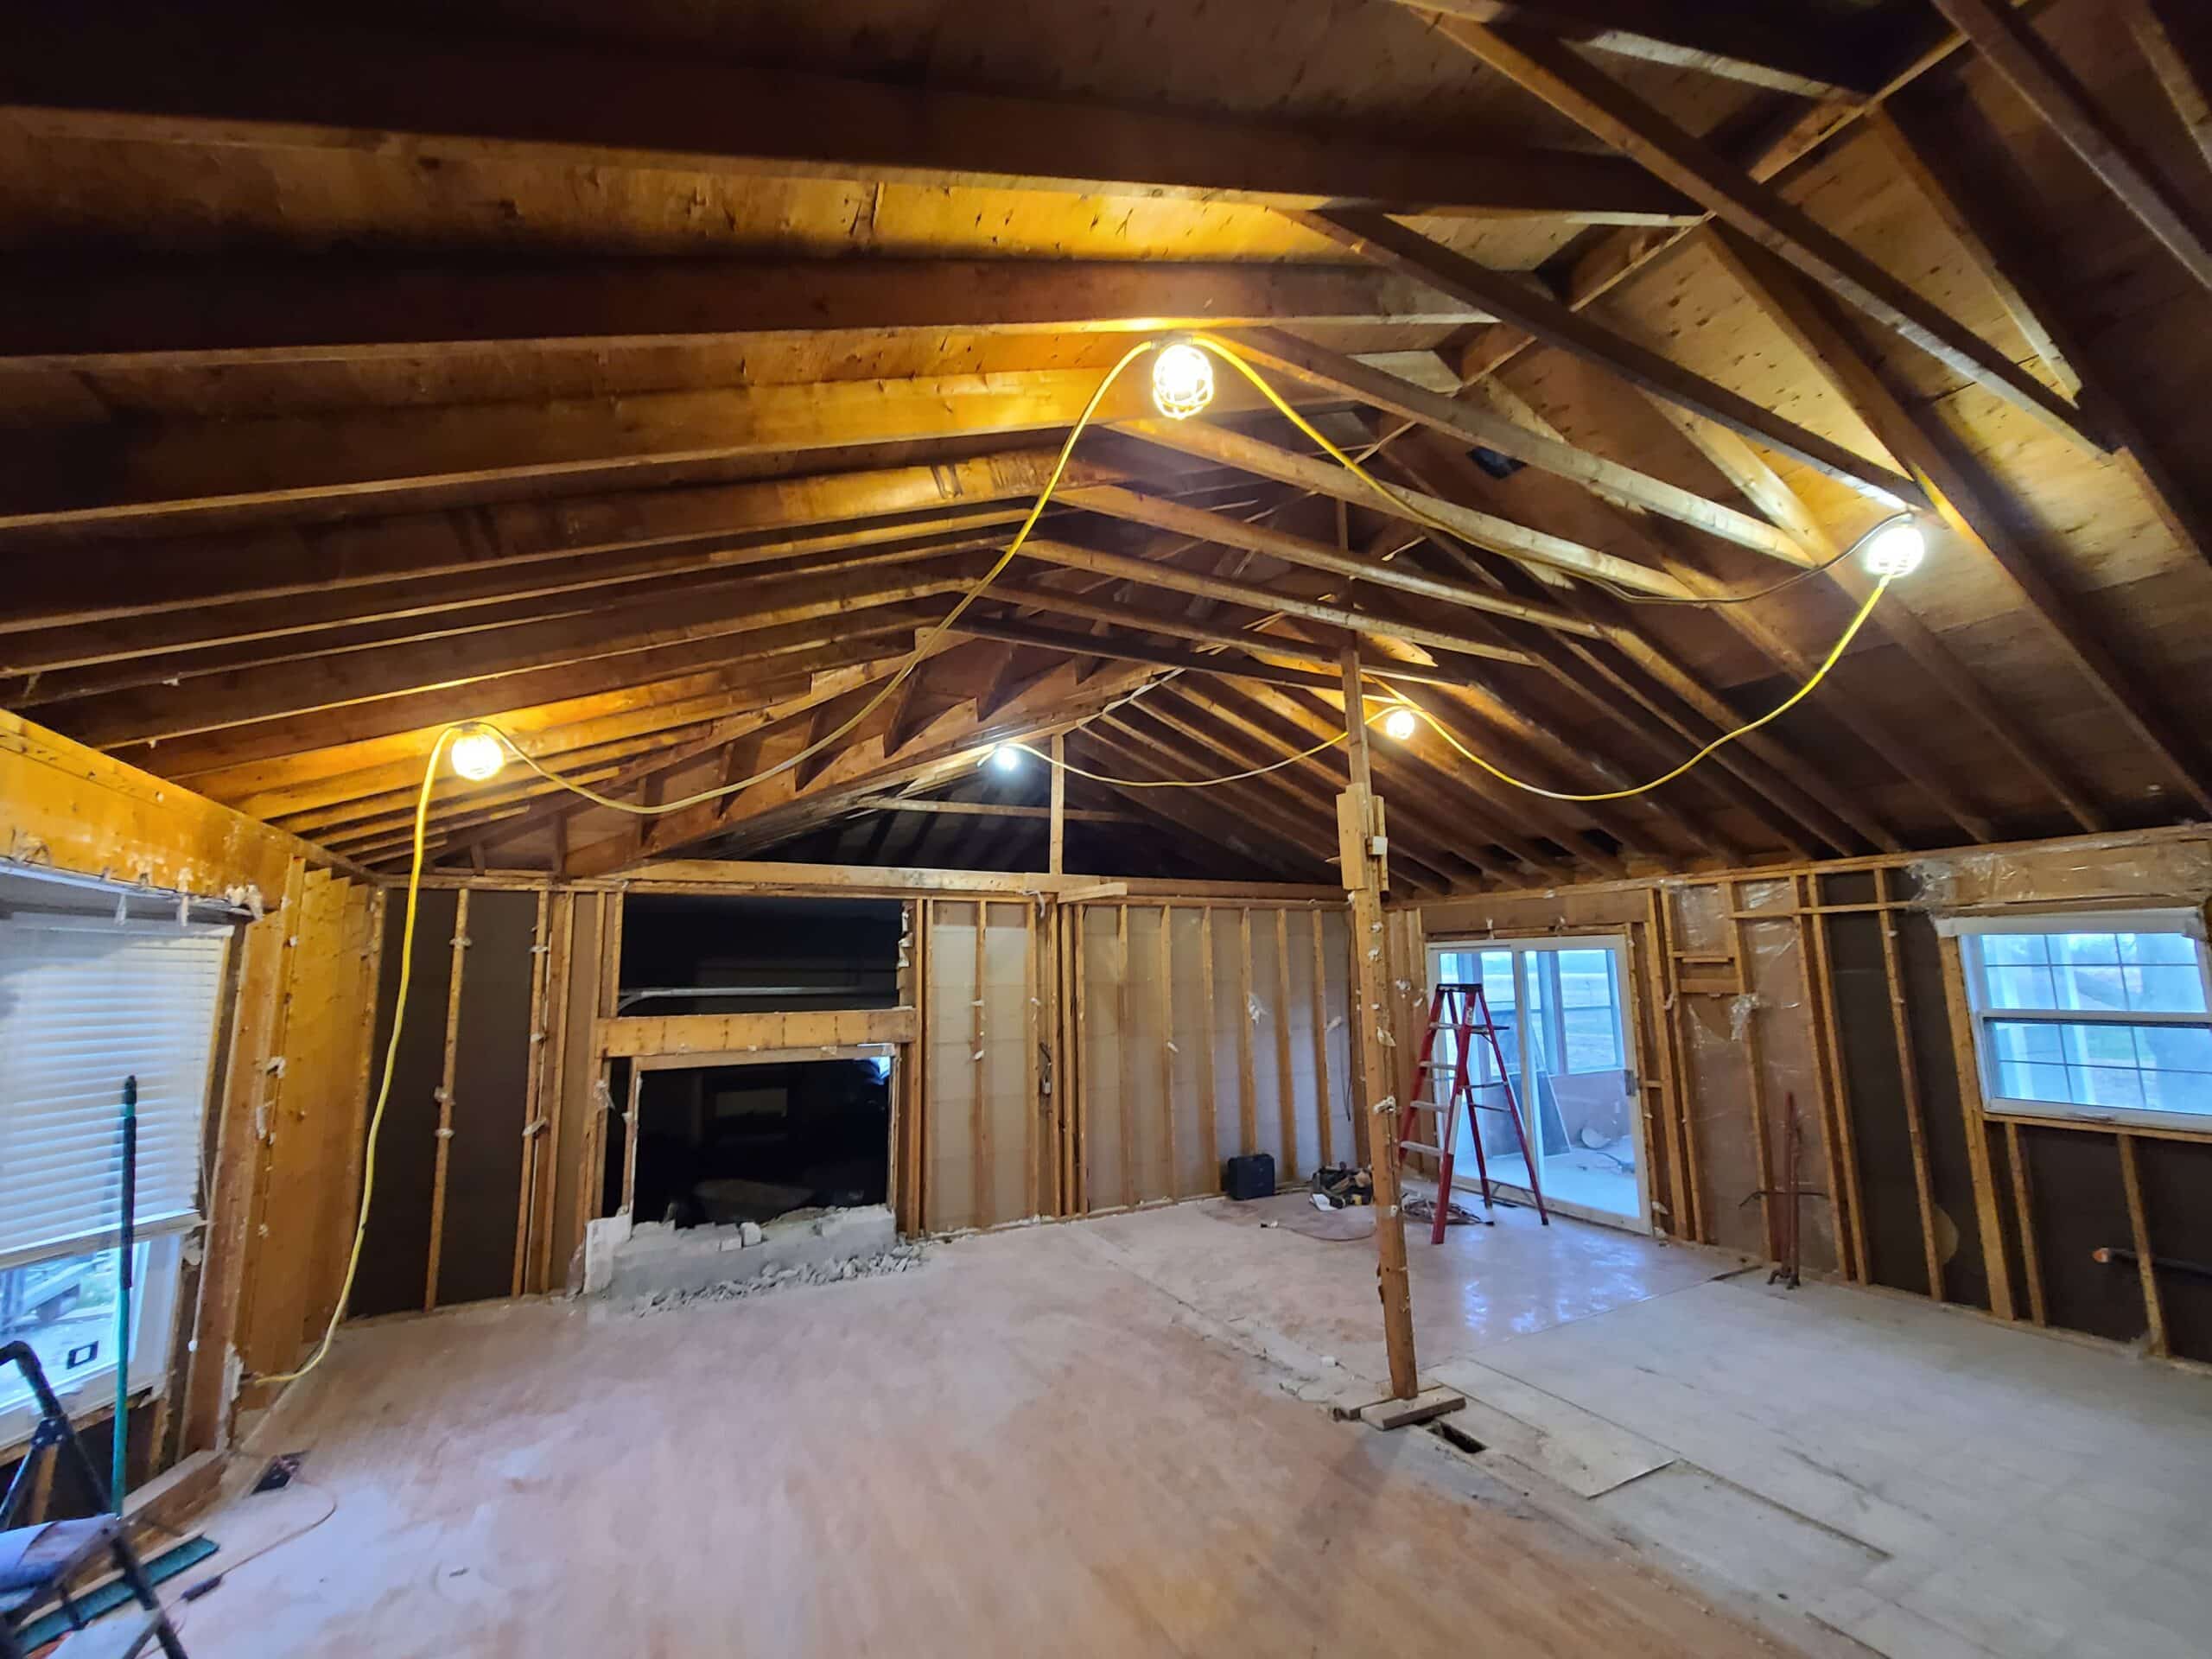 Vaulted Ceiling Framing exposed